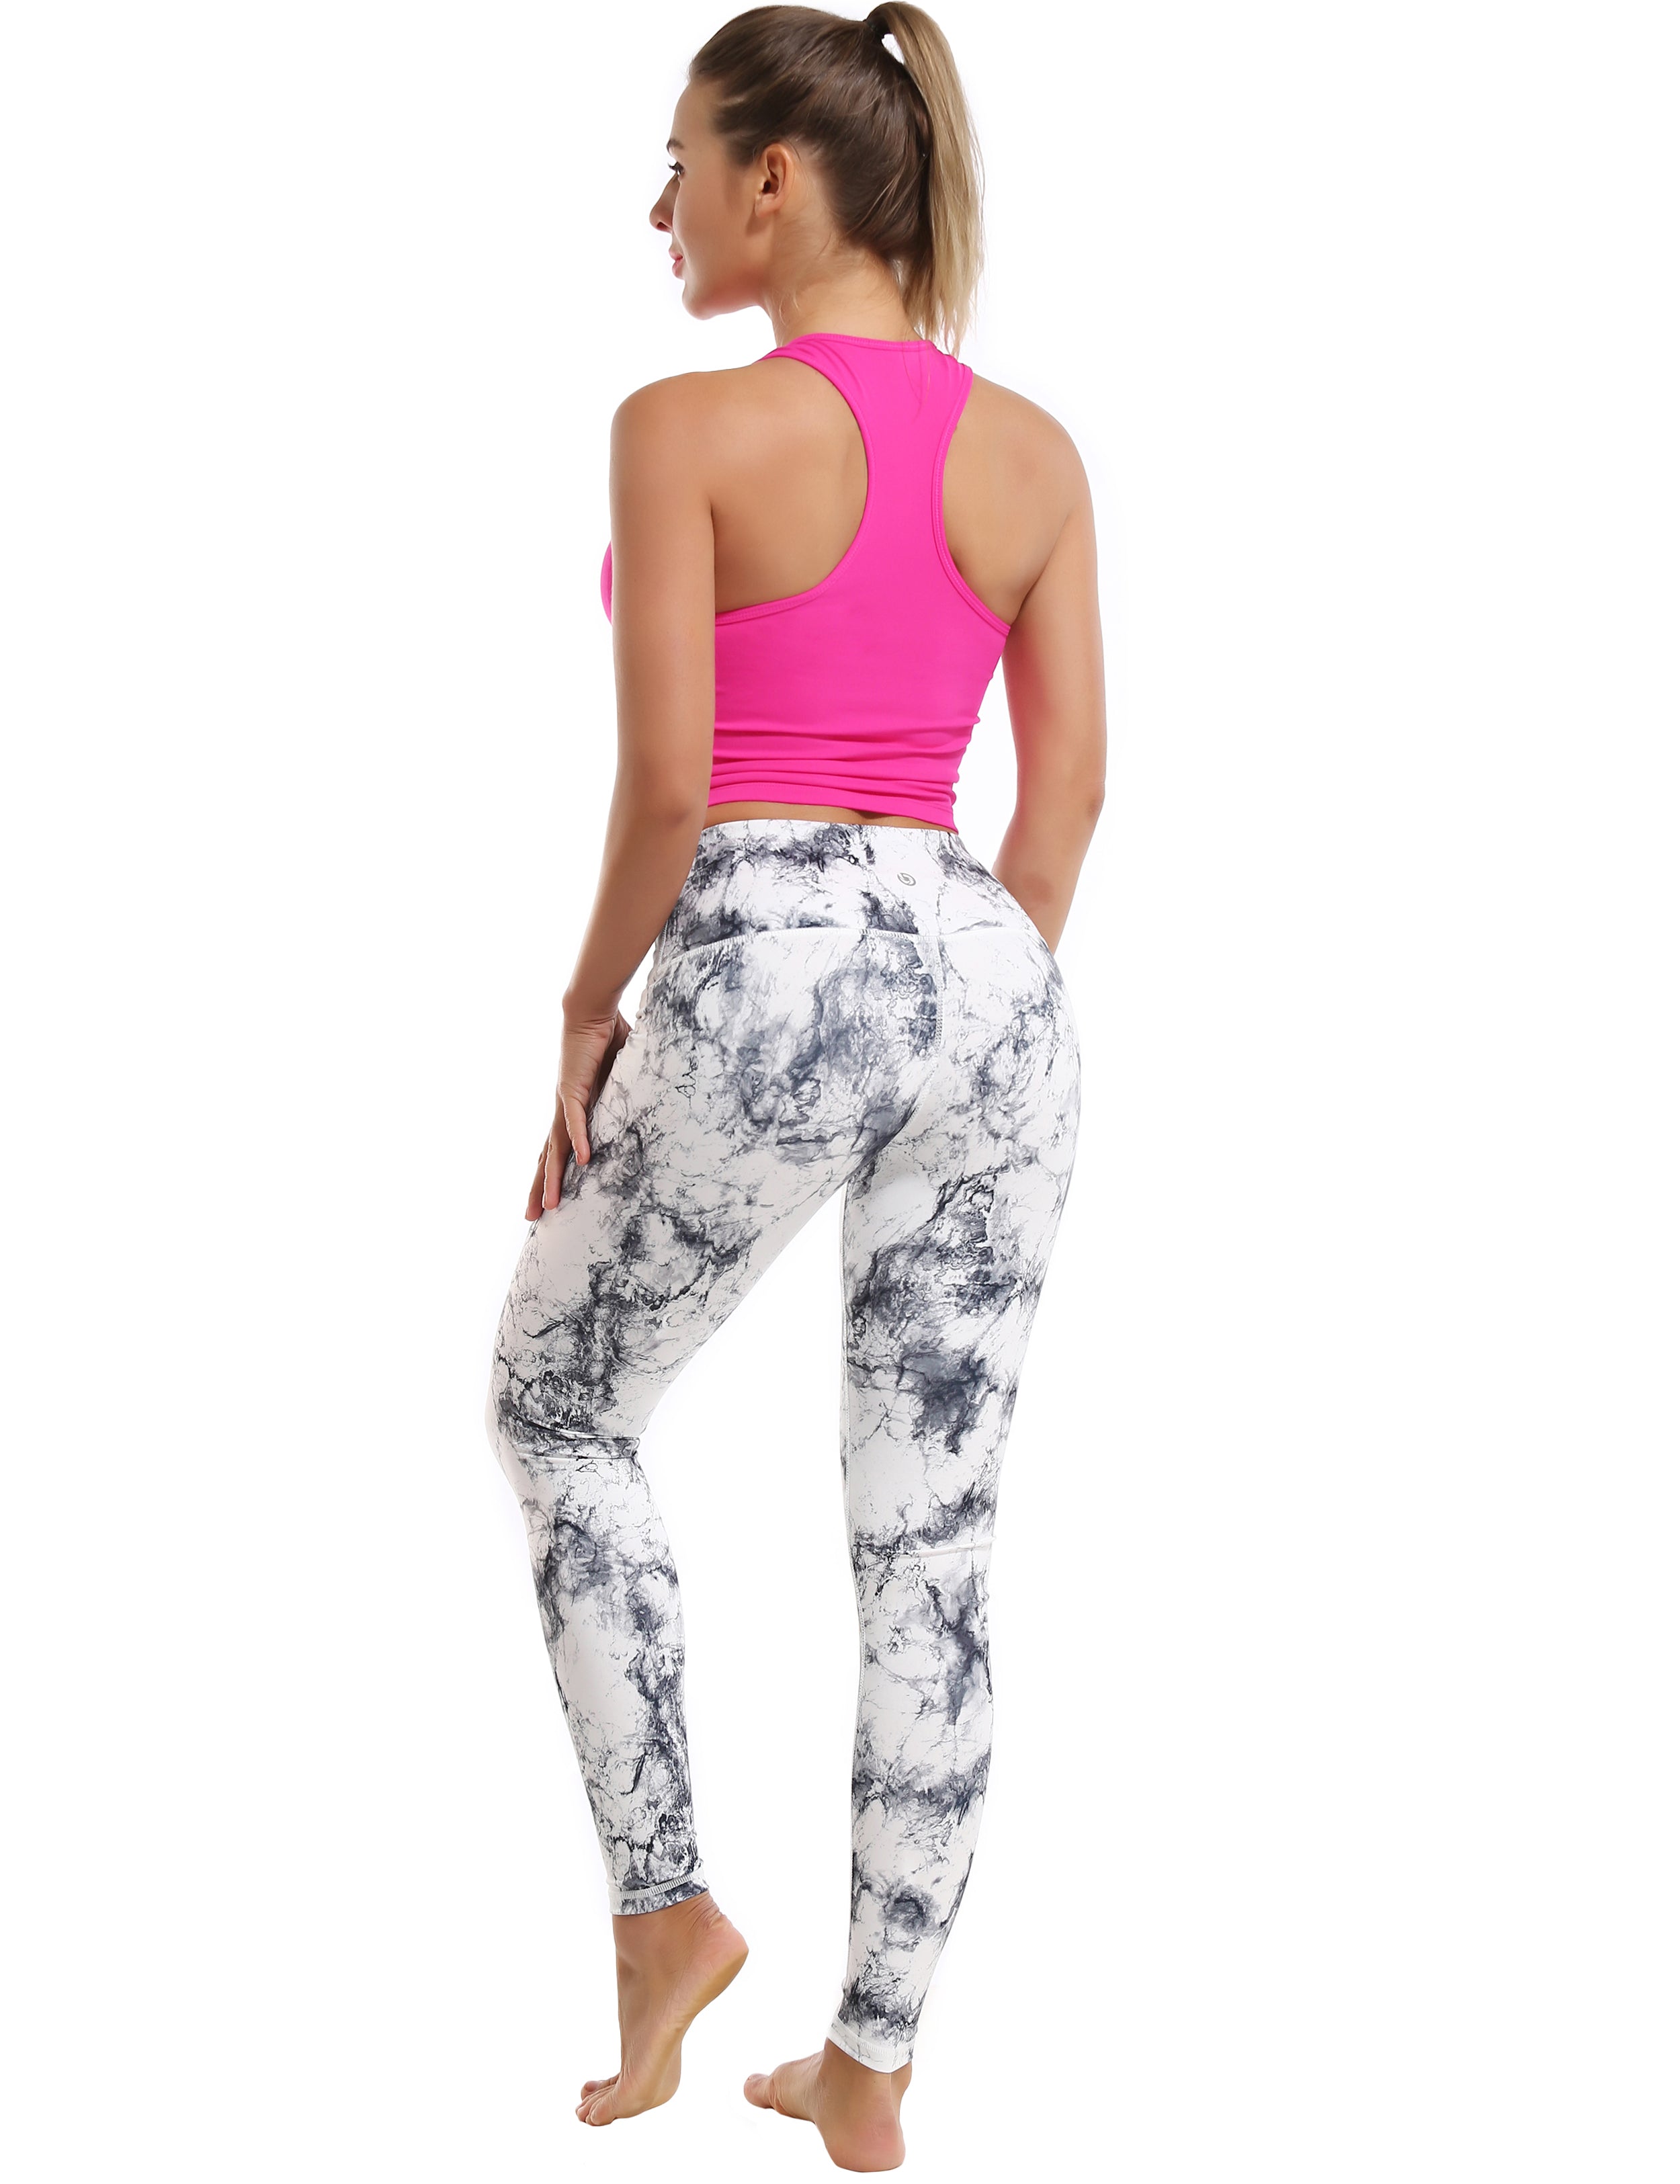 High Waist Jogging Pants arabescato 82%Polyester/18%Spandex Fabric doesn't attract lint easily 4-way stretch No see-through Moisture-wicking Tummy control Inner pocket